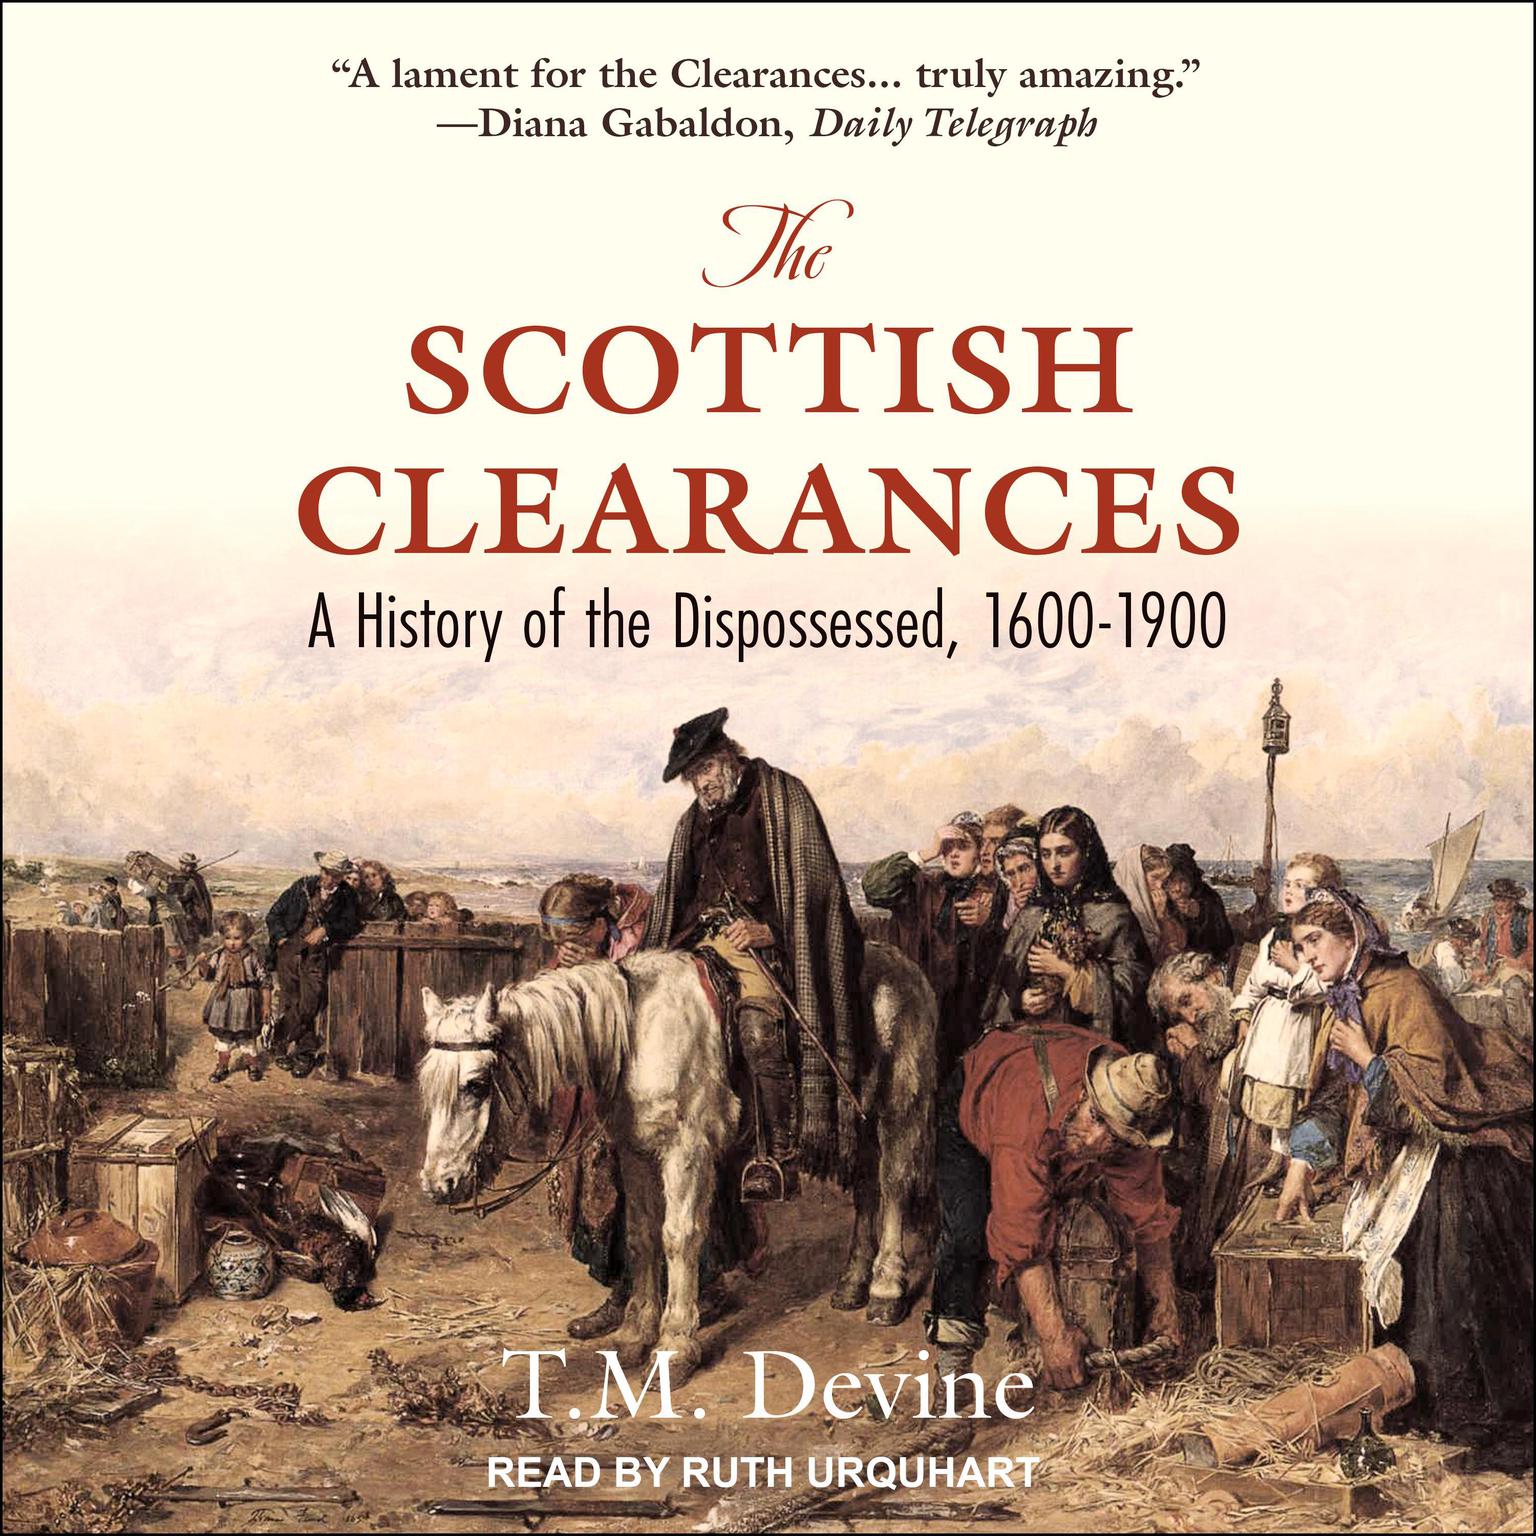 The Scottish Clearances: A History of the Dispossessed, 1600-1900 Audiobook, by T.M. Devine